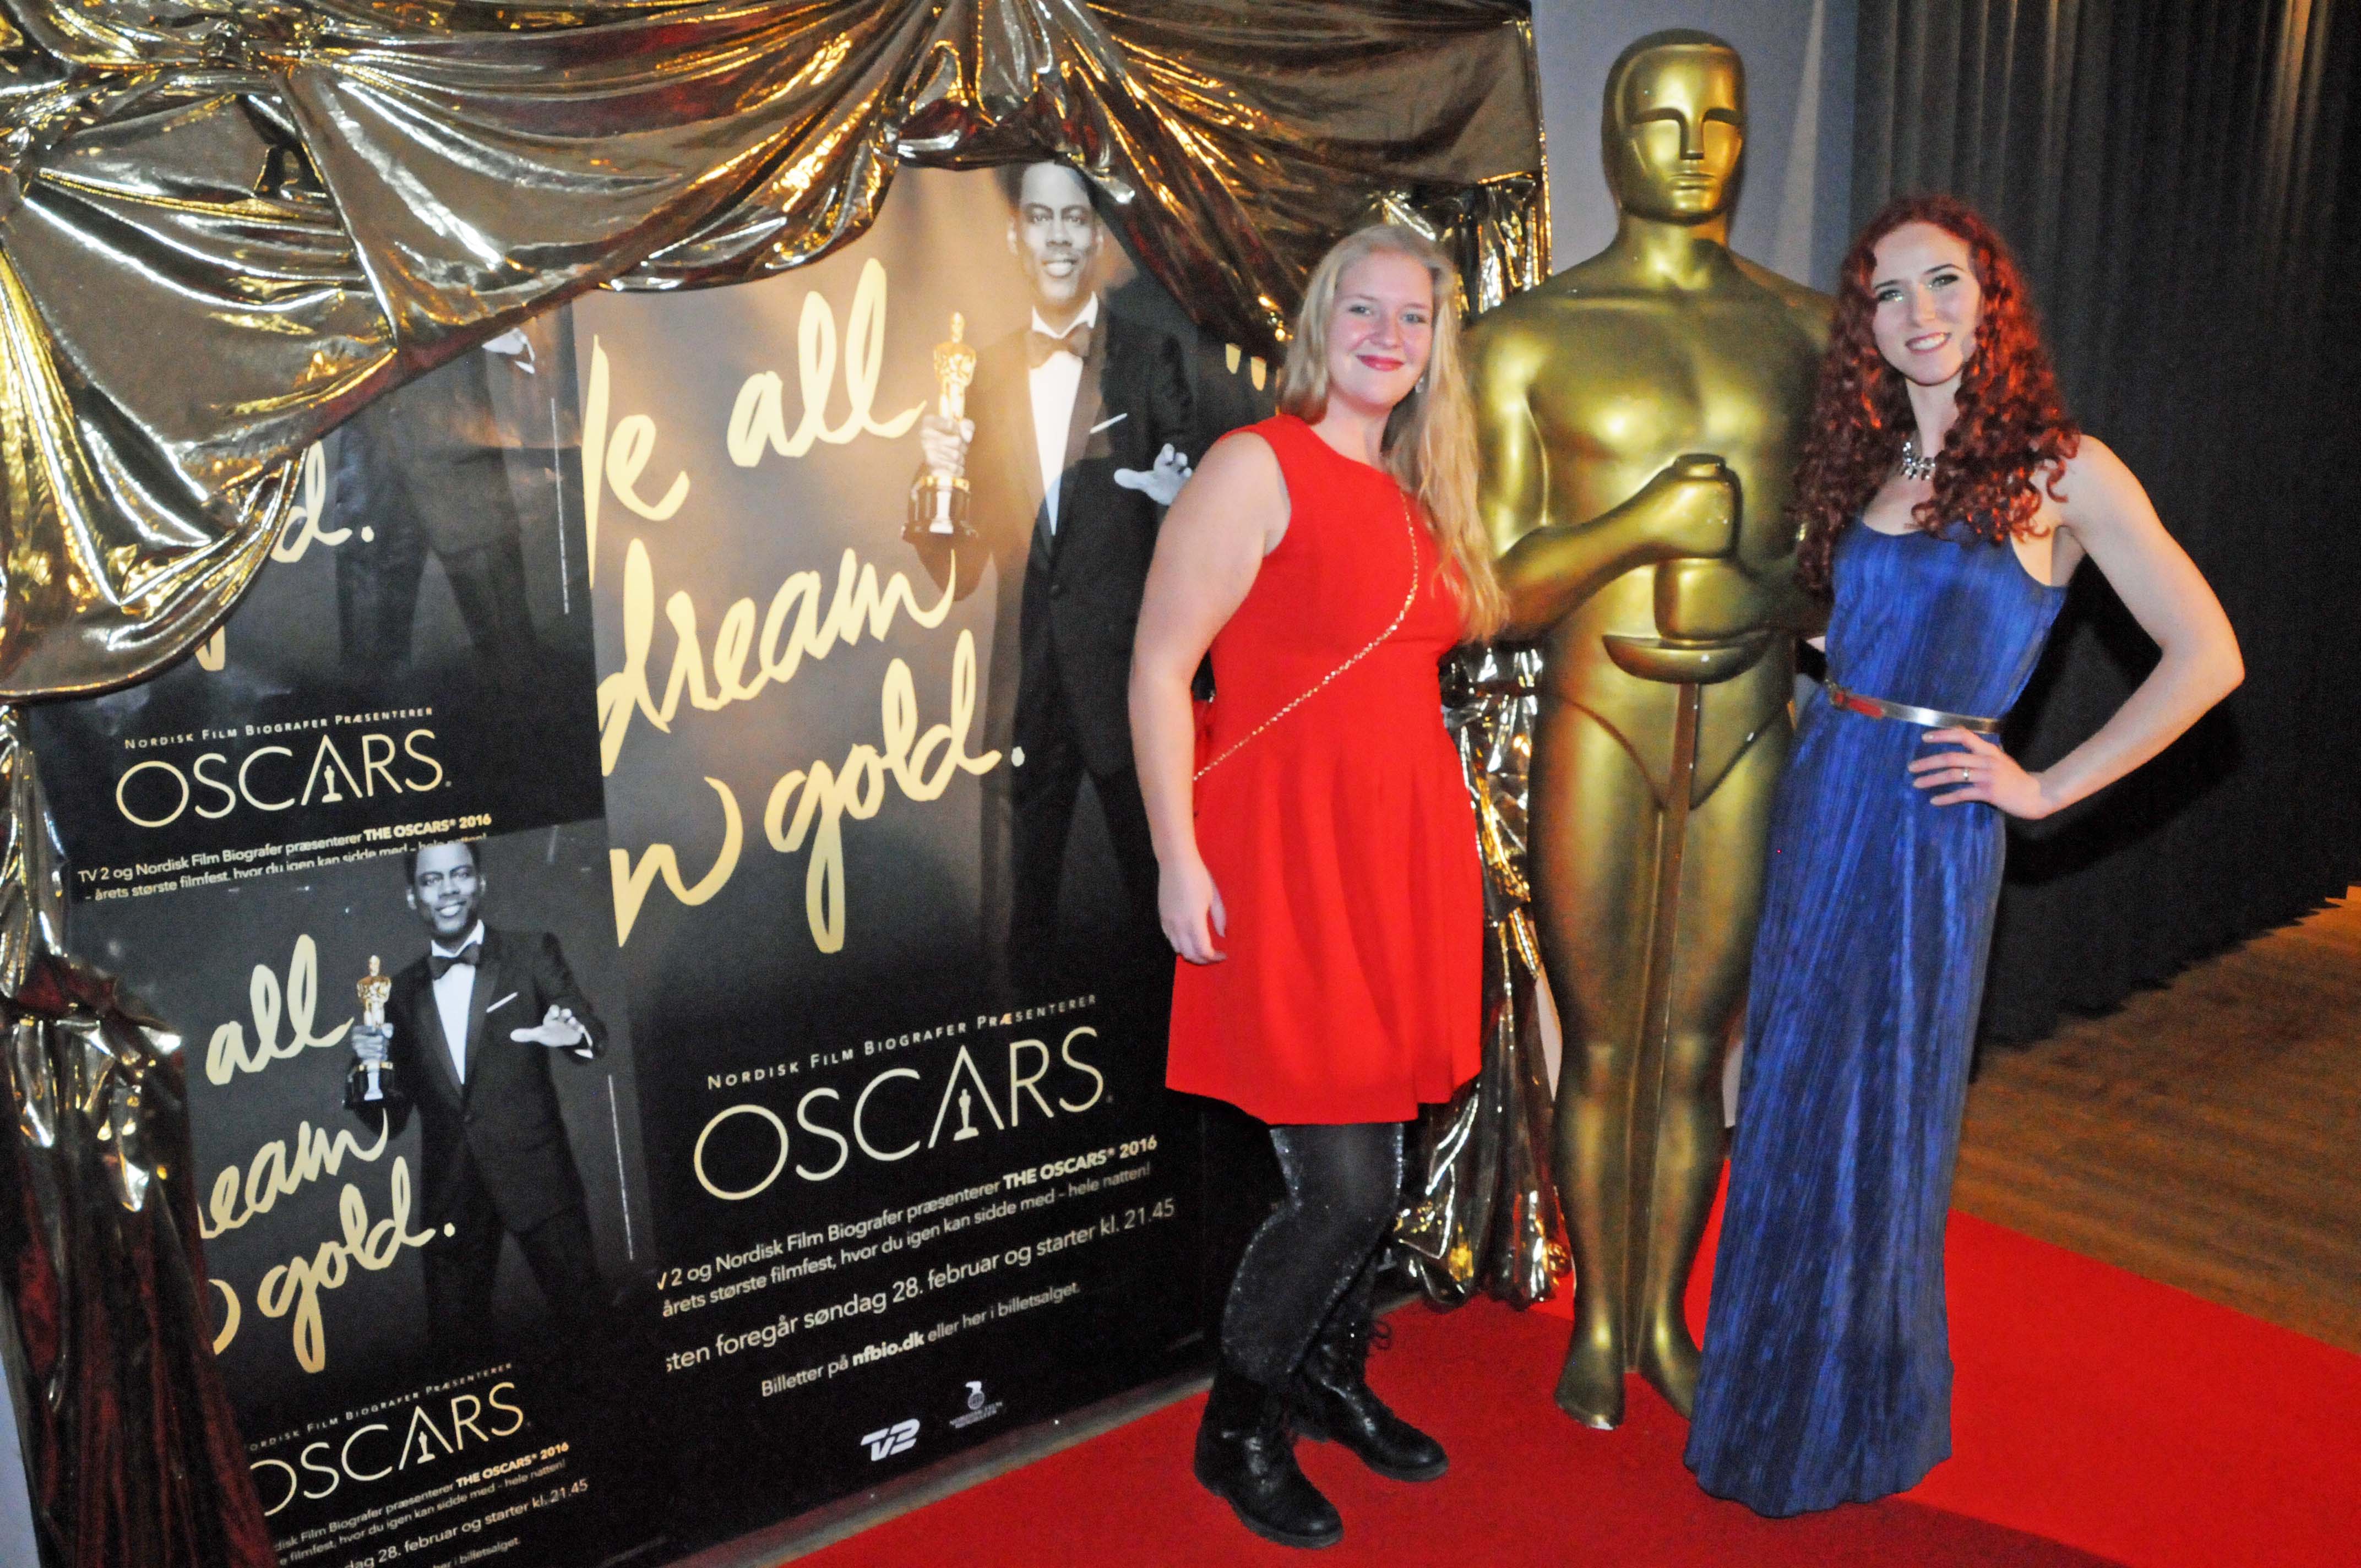 About Town: Oscar night in the confines of the Imperial majesty